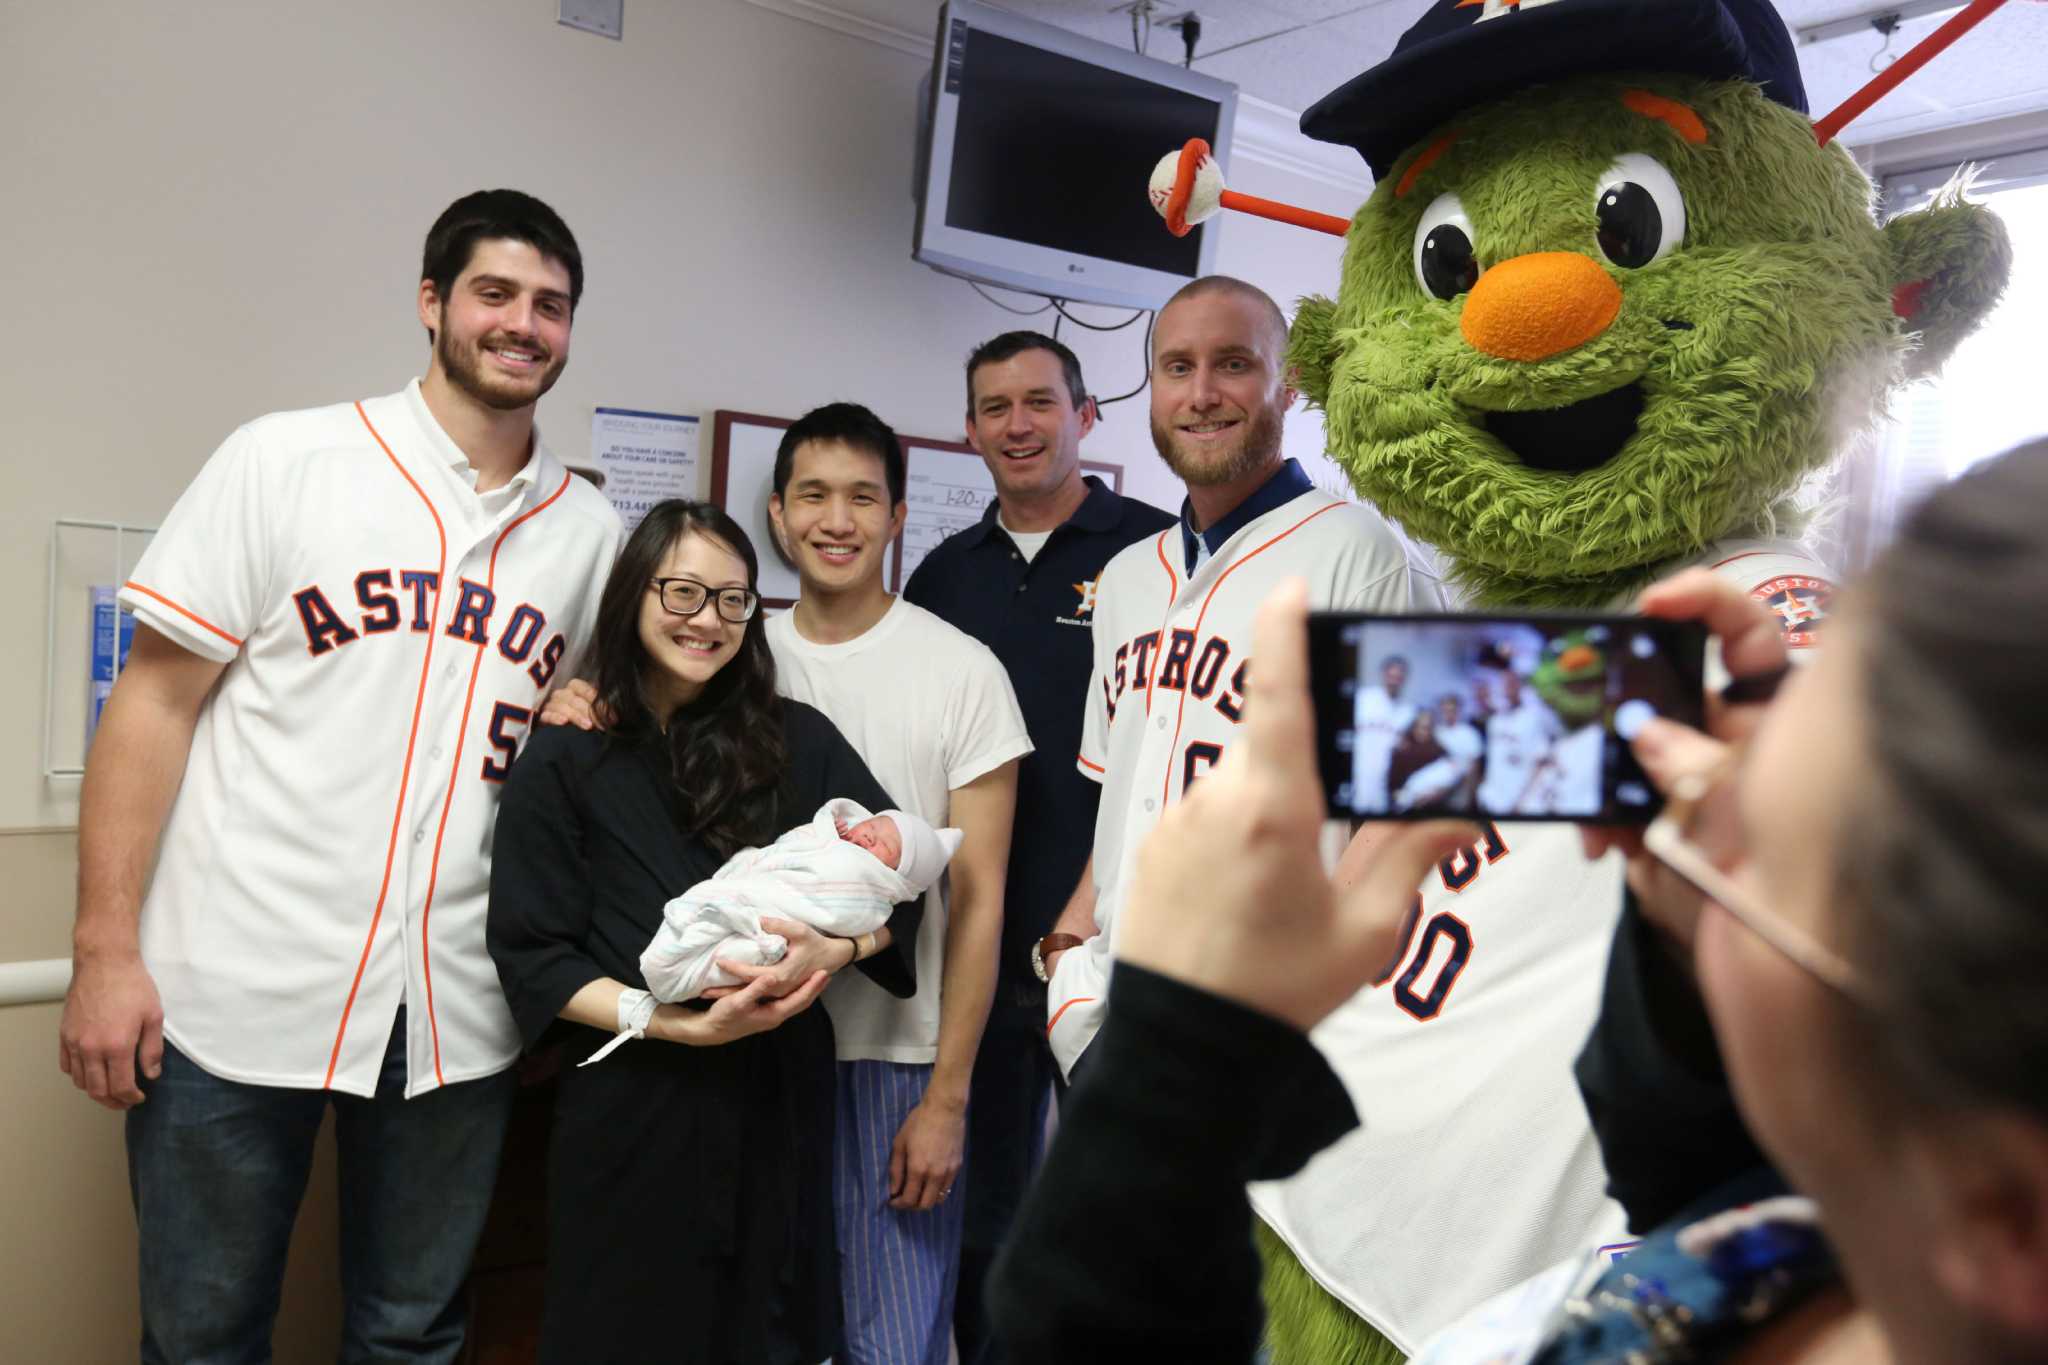 Enthusiastic crowds help players bask in 2015 success on Astros Caravan